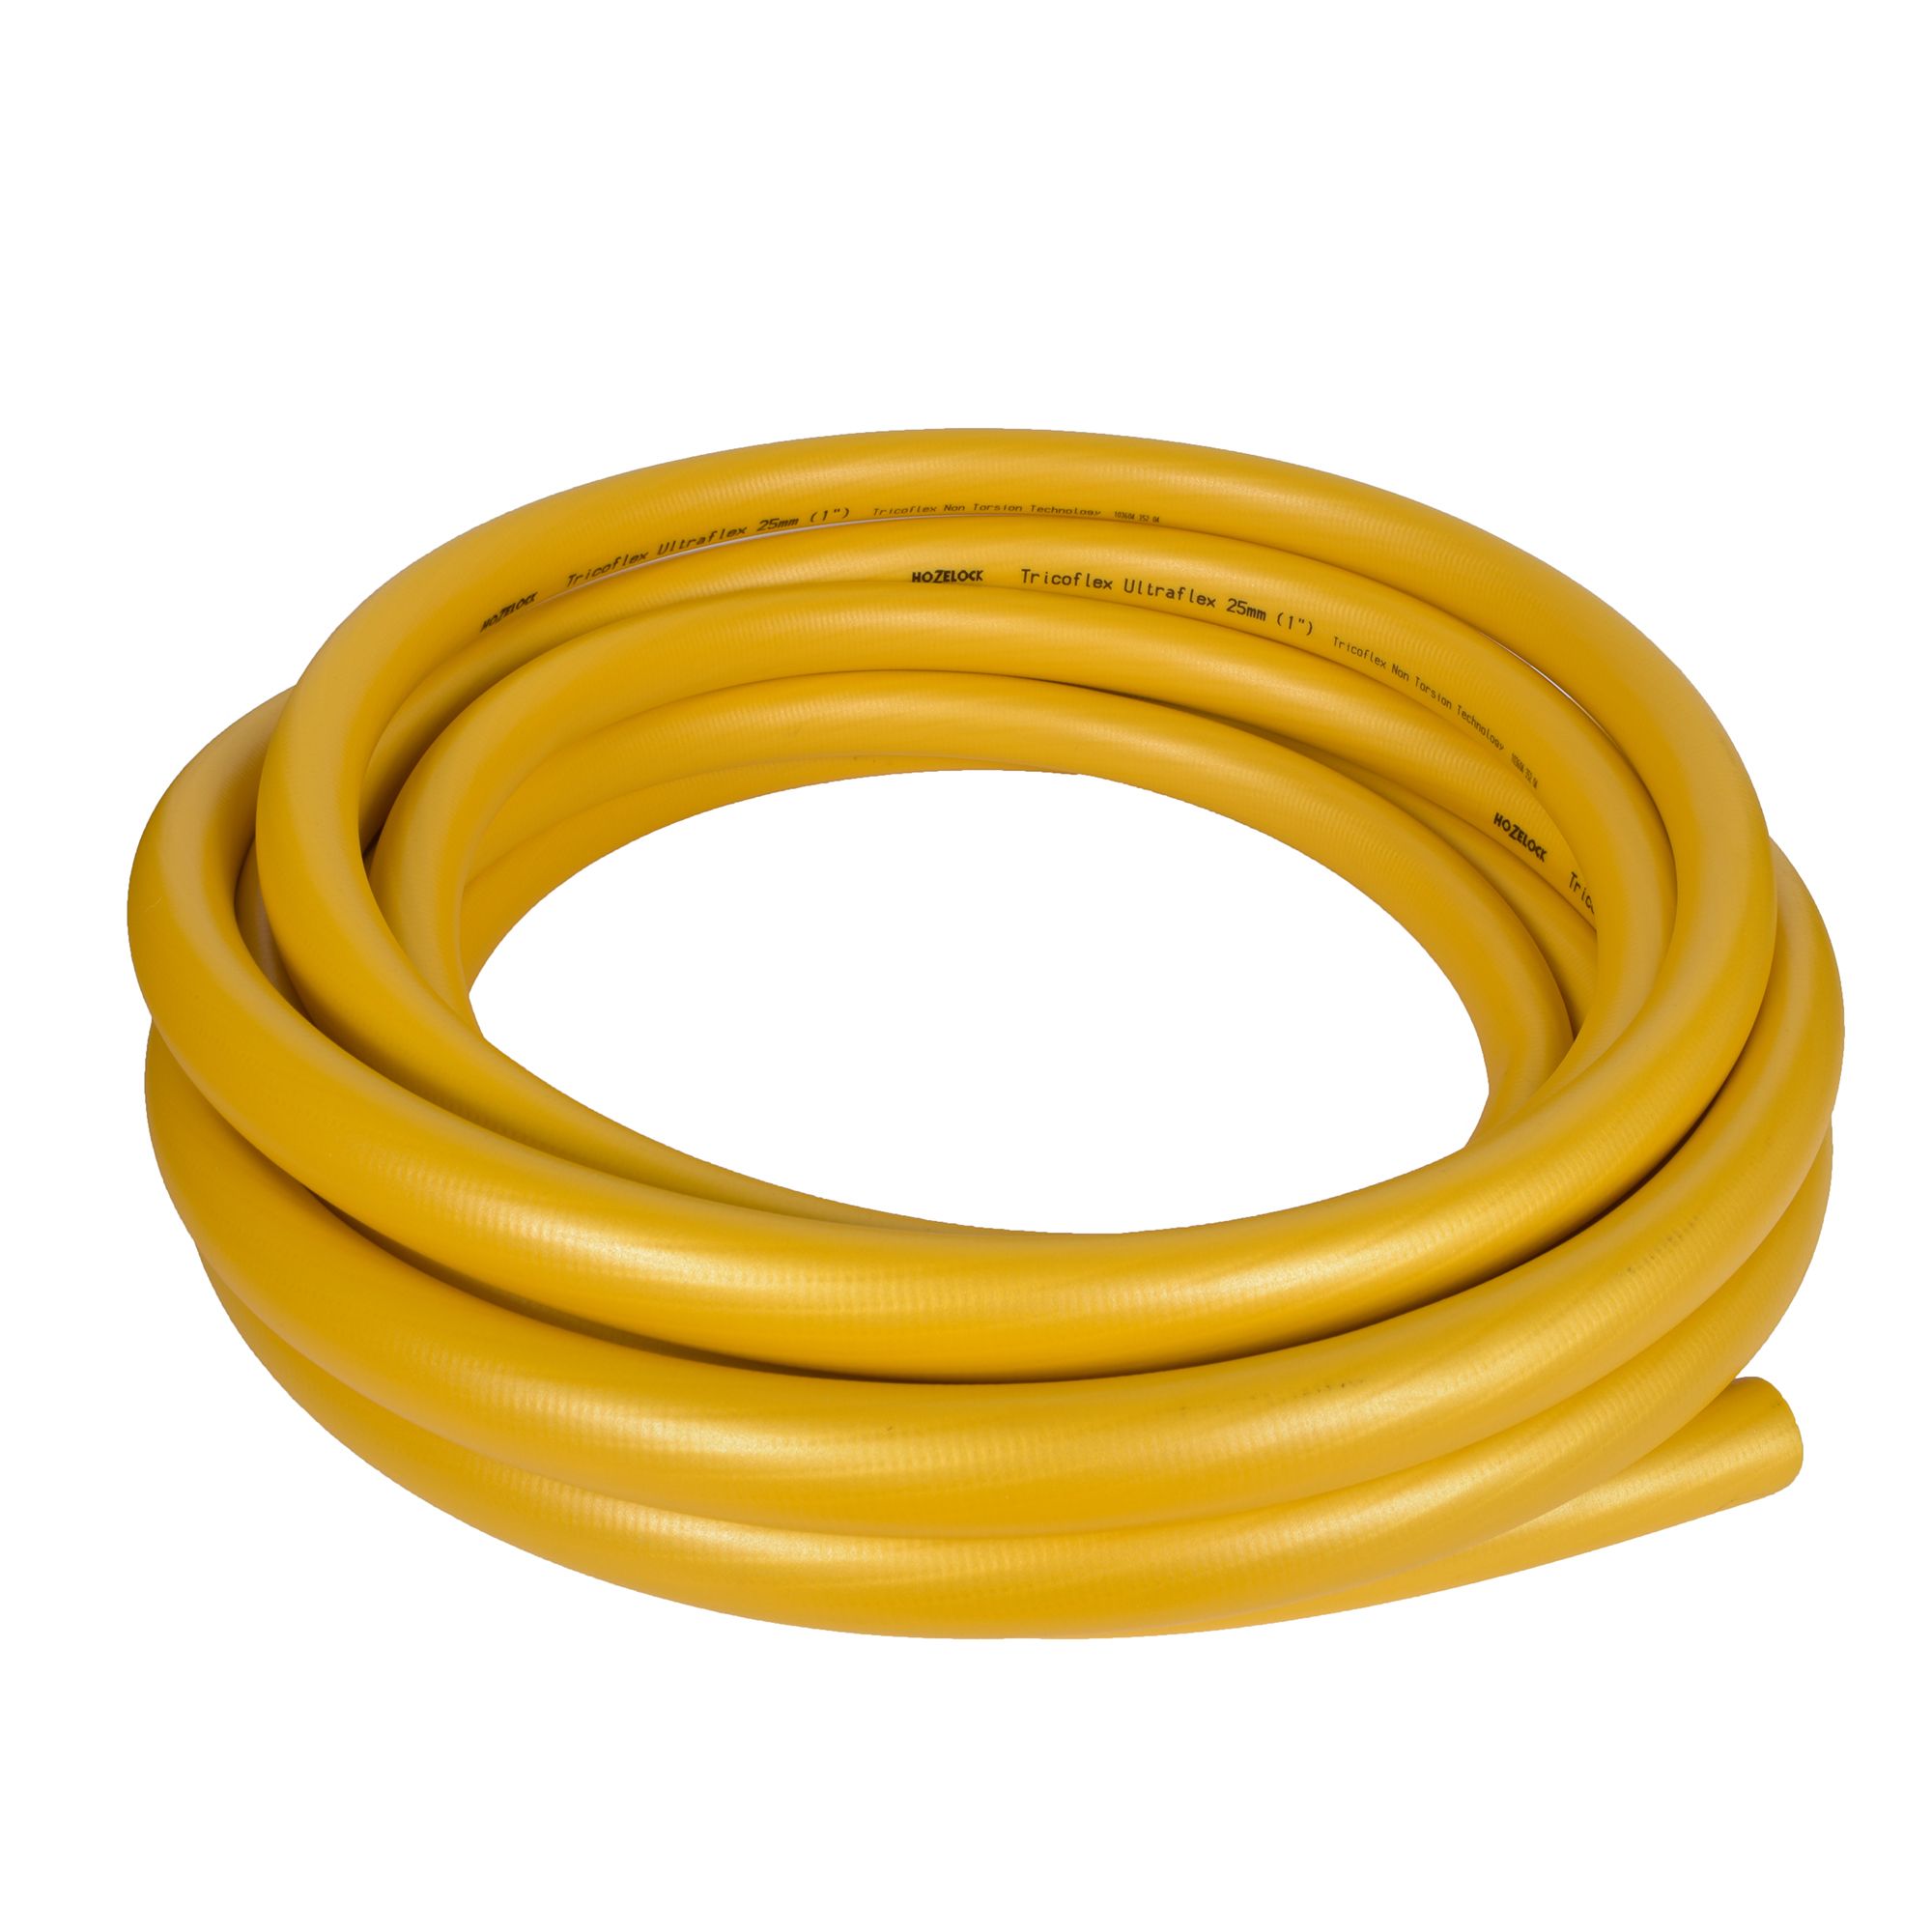 Hozelock 6765 0000 pipe DIY (L)10m 5-layer hose B&Q | at Yellow reinforced